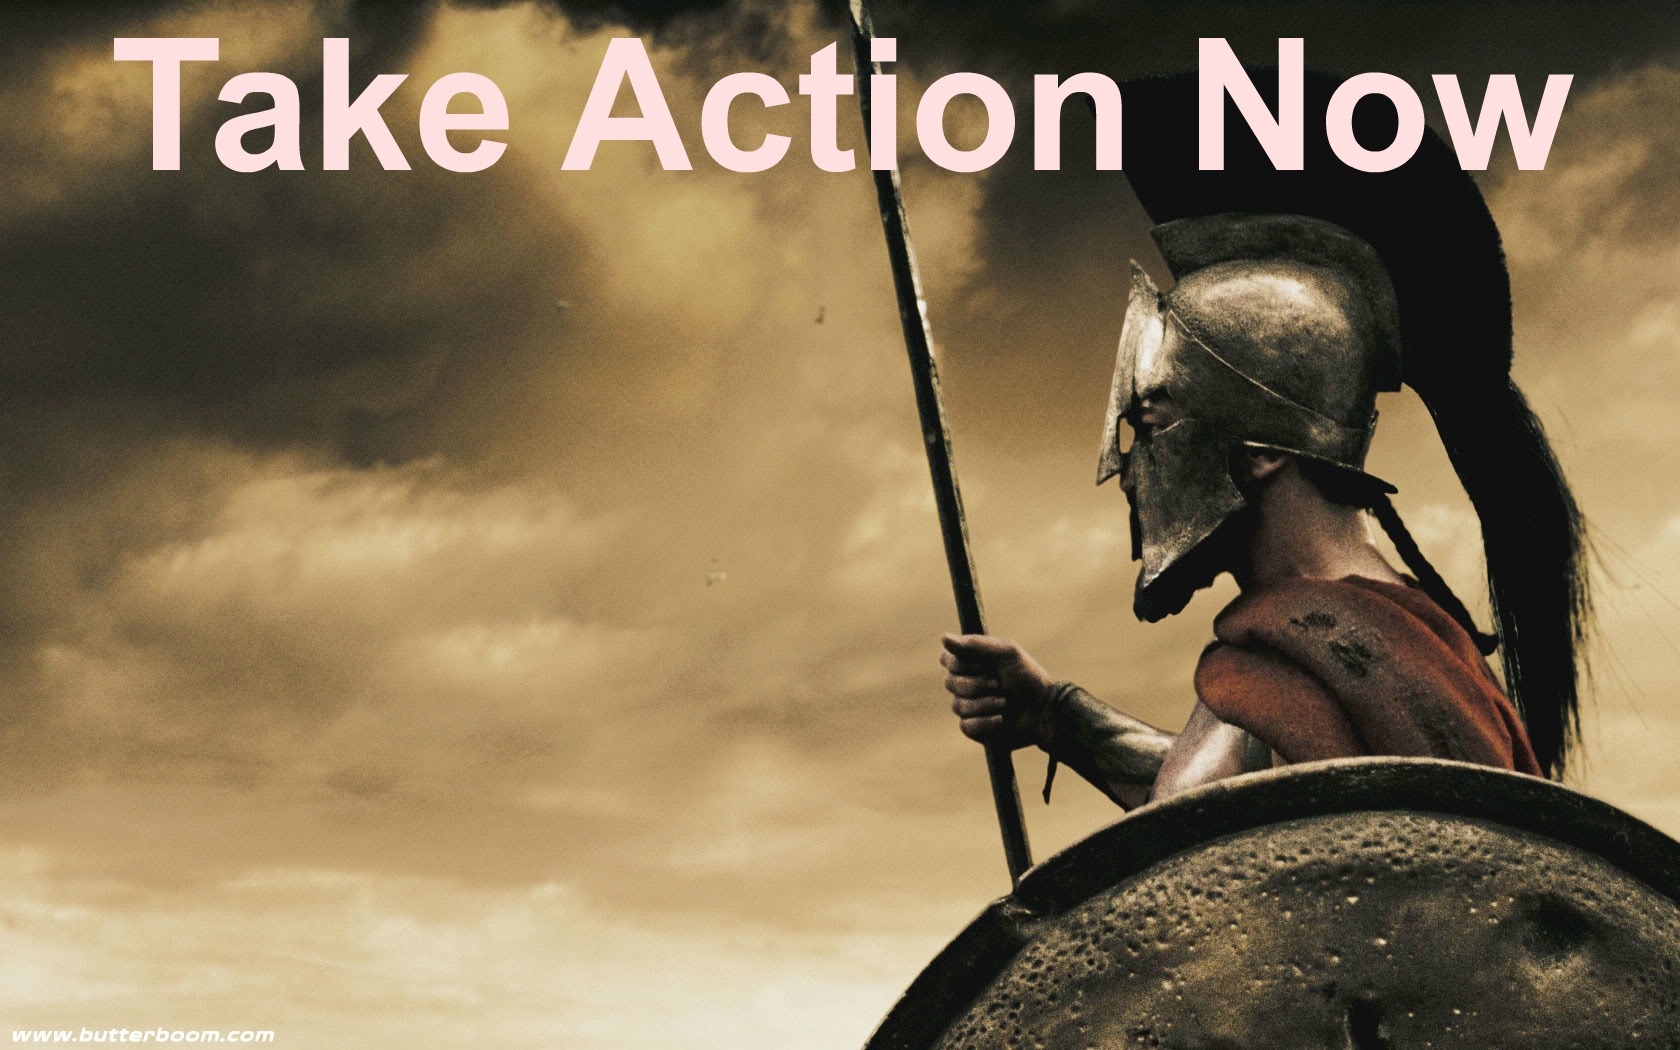 Take Action Now